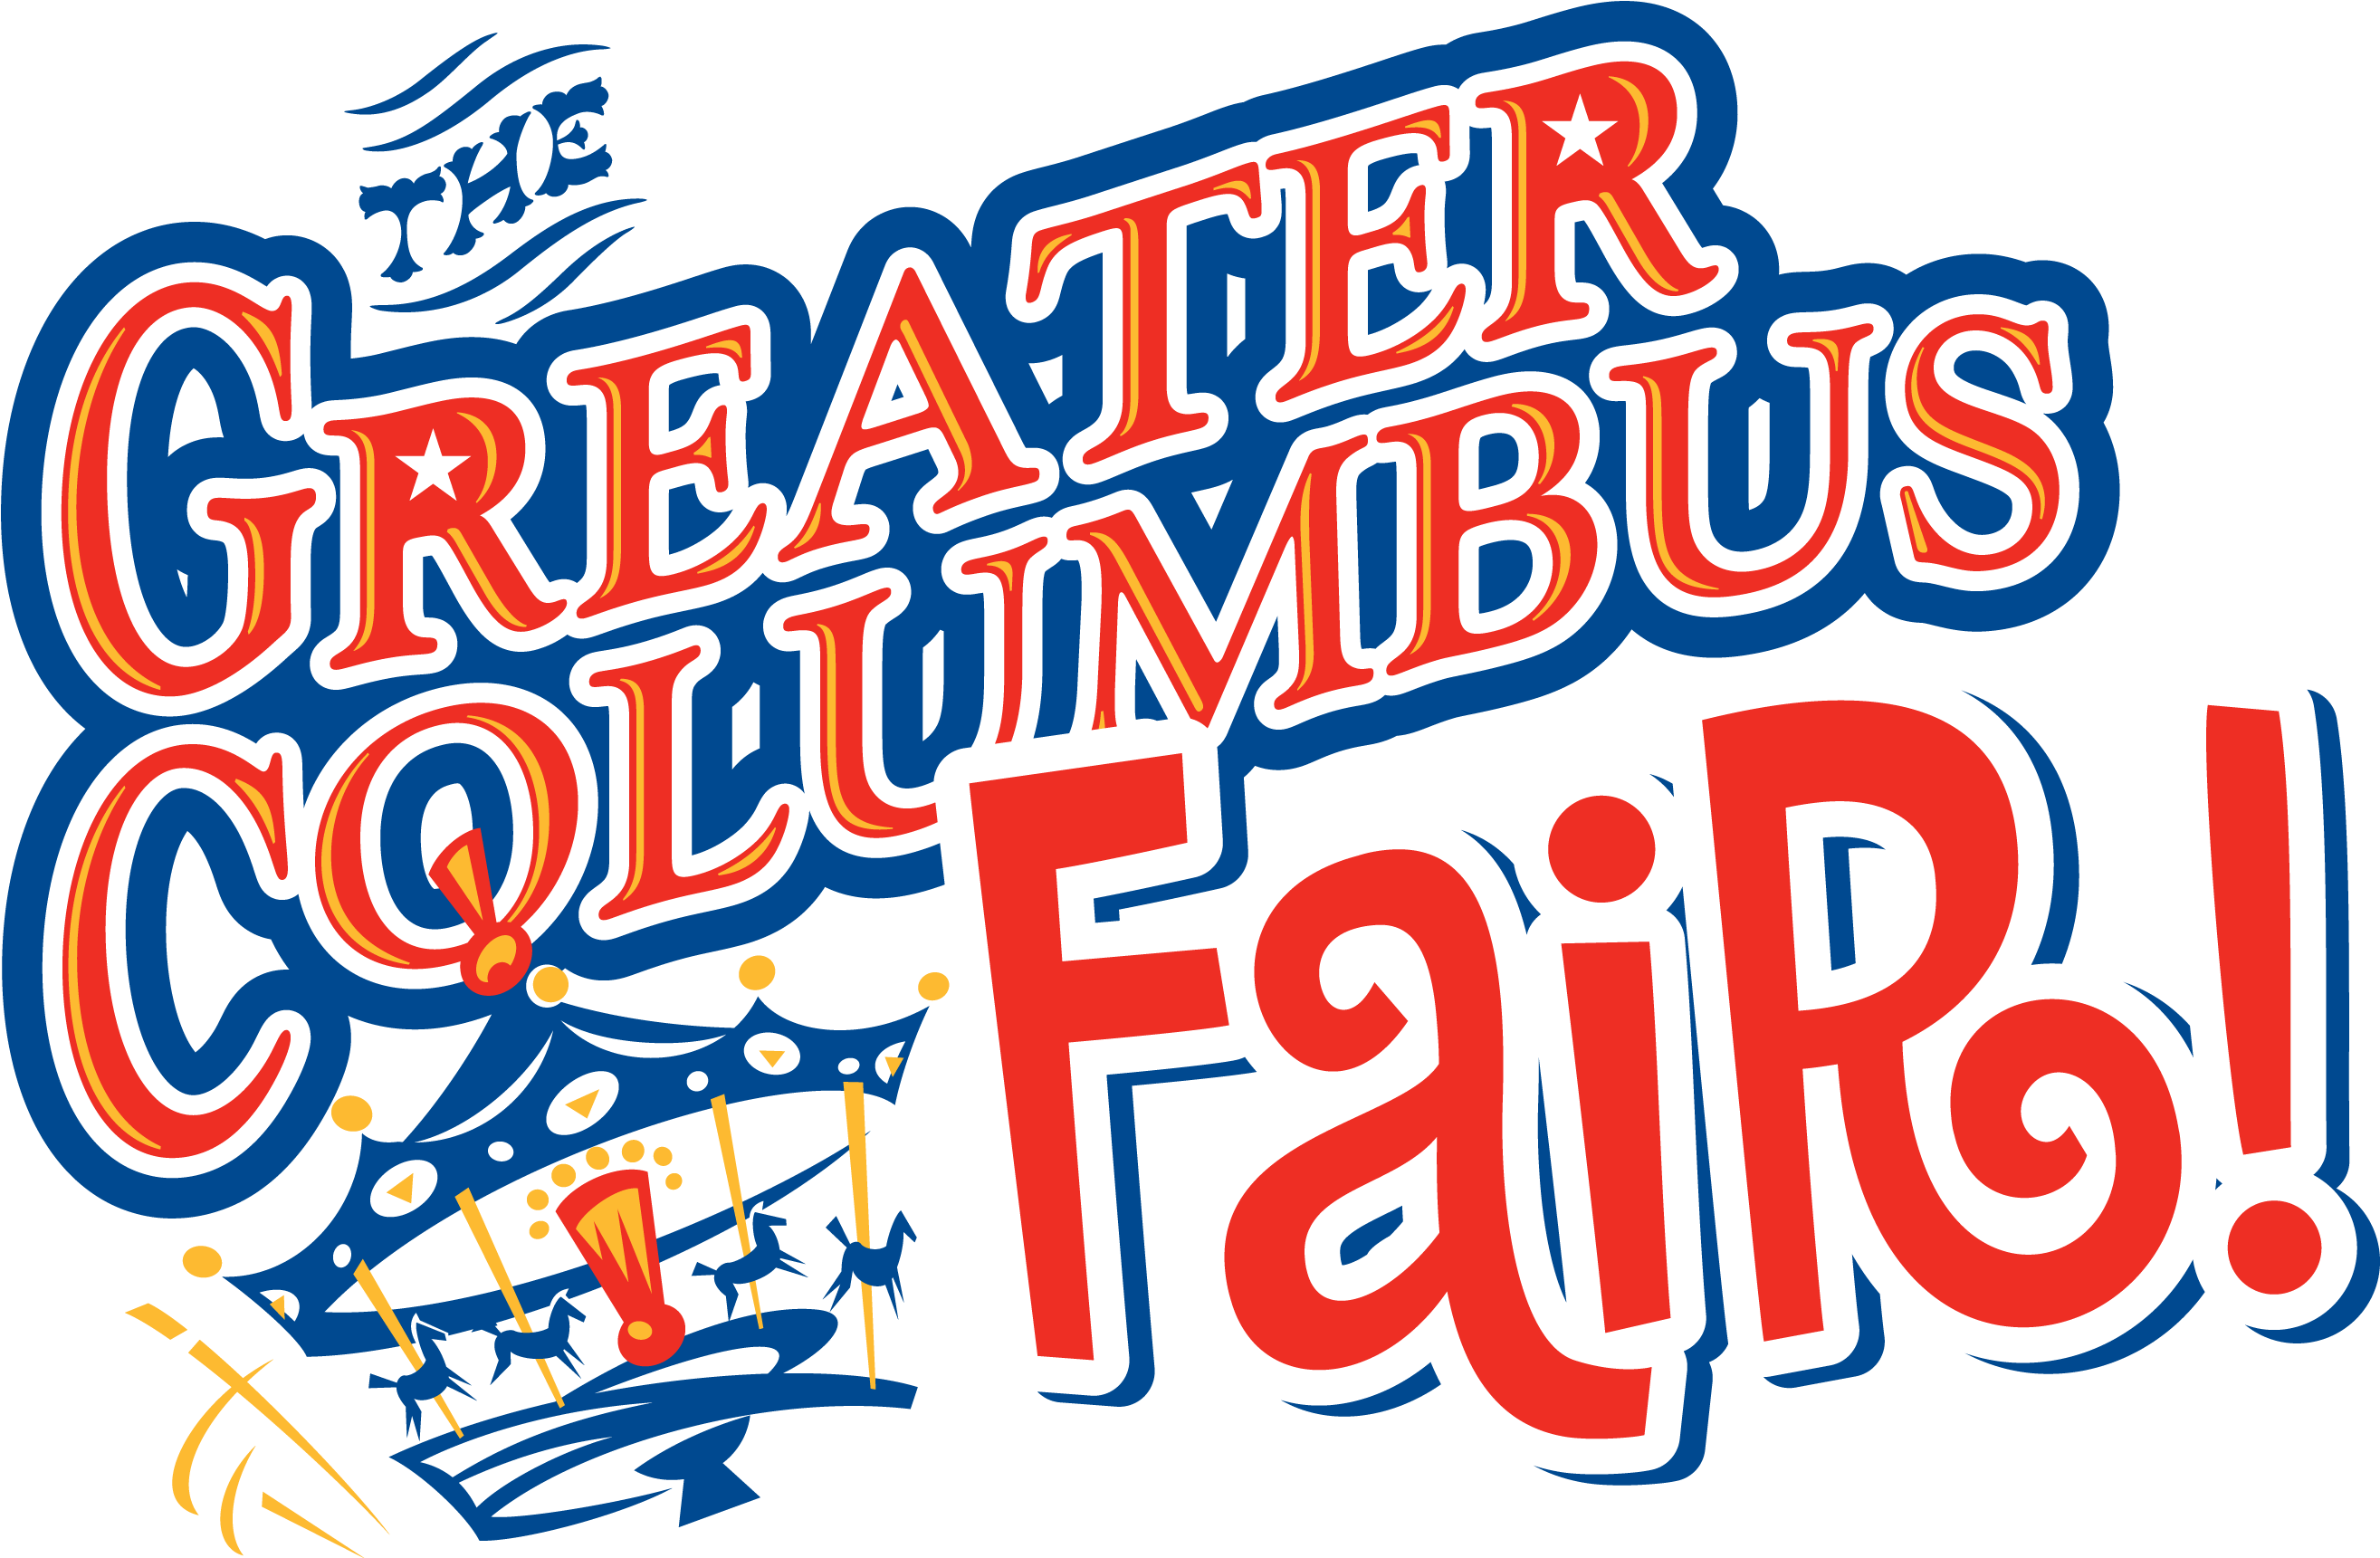 The Greater Columbus Fair - Anthem Senor And The Queen (2700x1800)